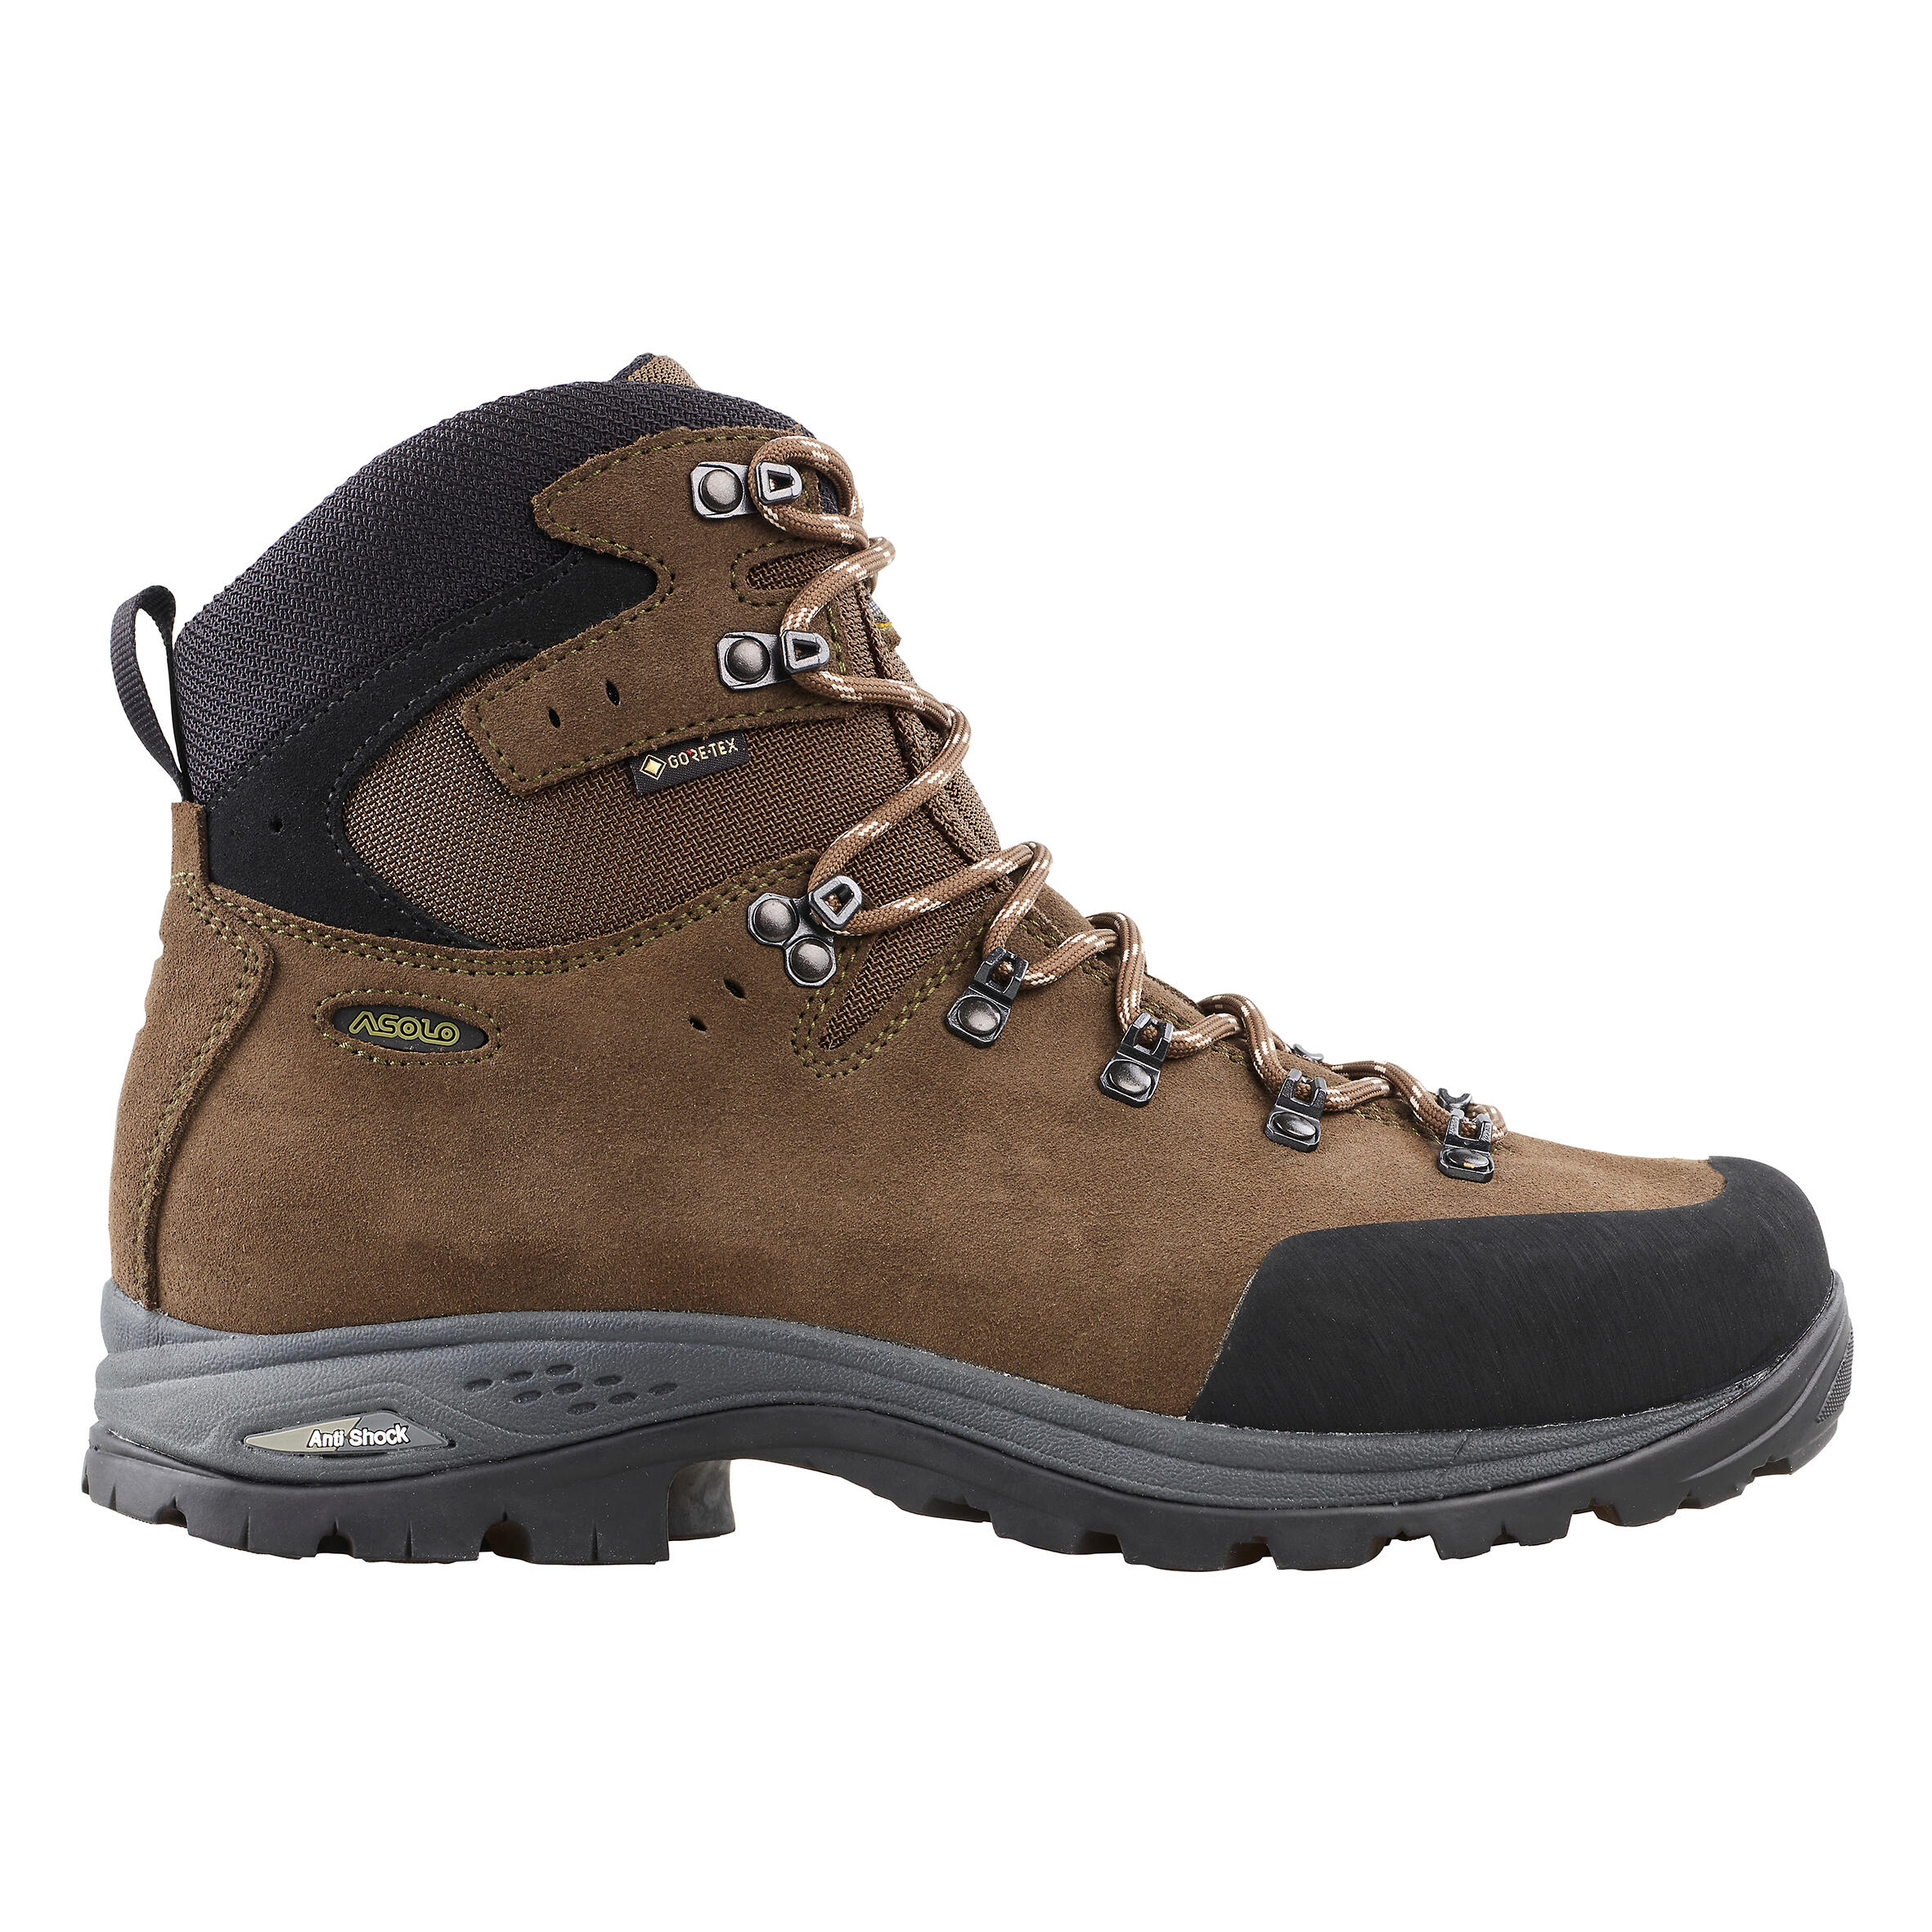 Waterproof Country Sport Boots Asolo X-Hunt Forest Gore-Tex Vibram 4/14